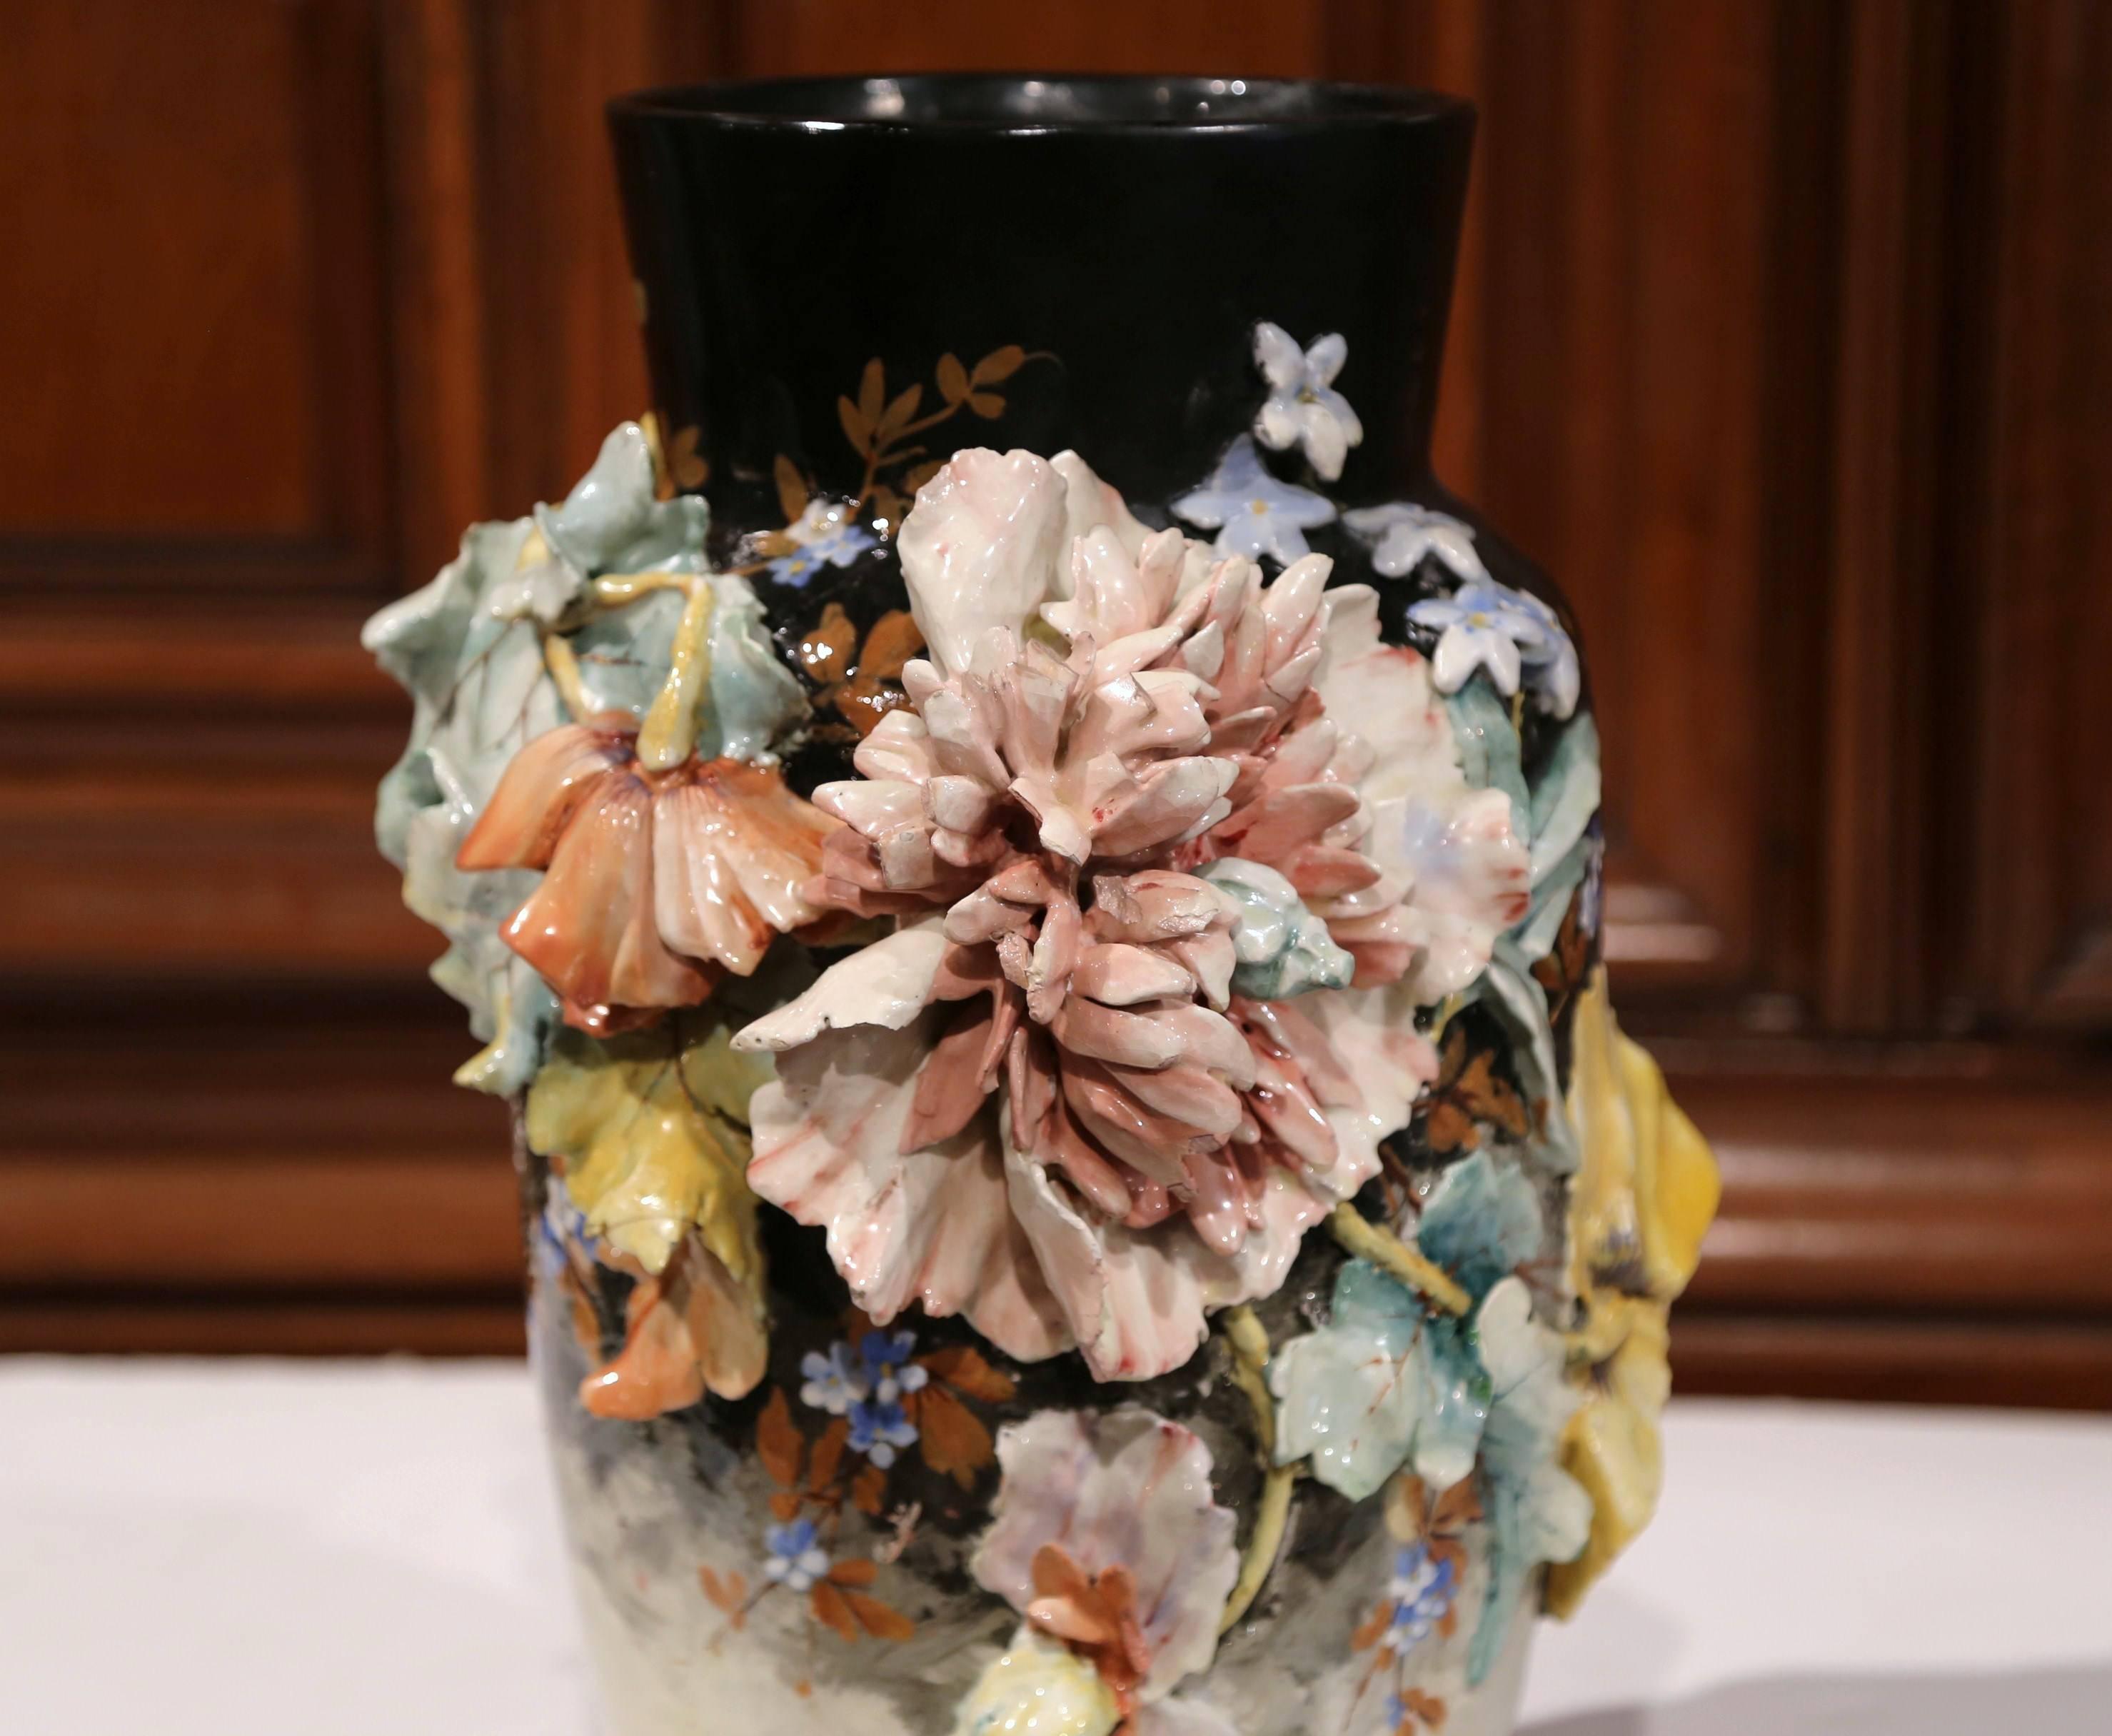 This beautiful, hand painted Majolica vase was sculpted in Montigny sur Loing, France, circa 1870. This colorful black, grey and white ceramic planter is decorated with high relief large flowers in a pink, orange and yellow palette and embellished